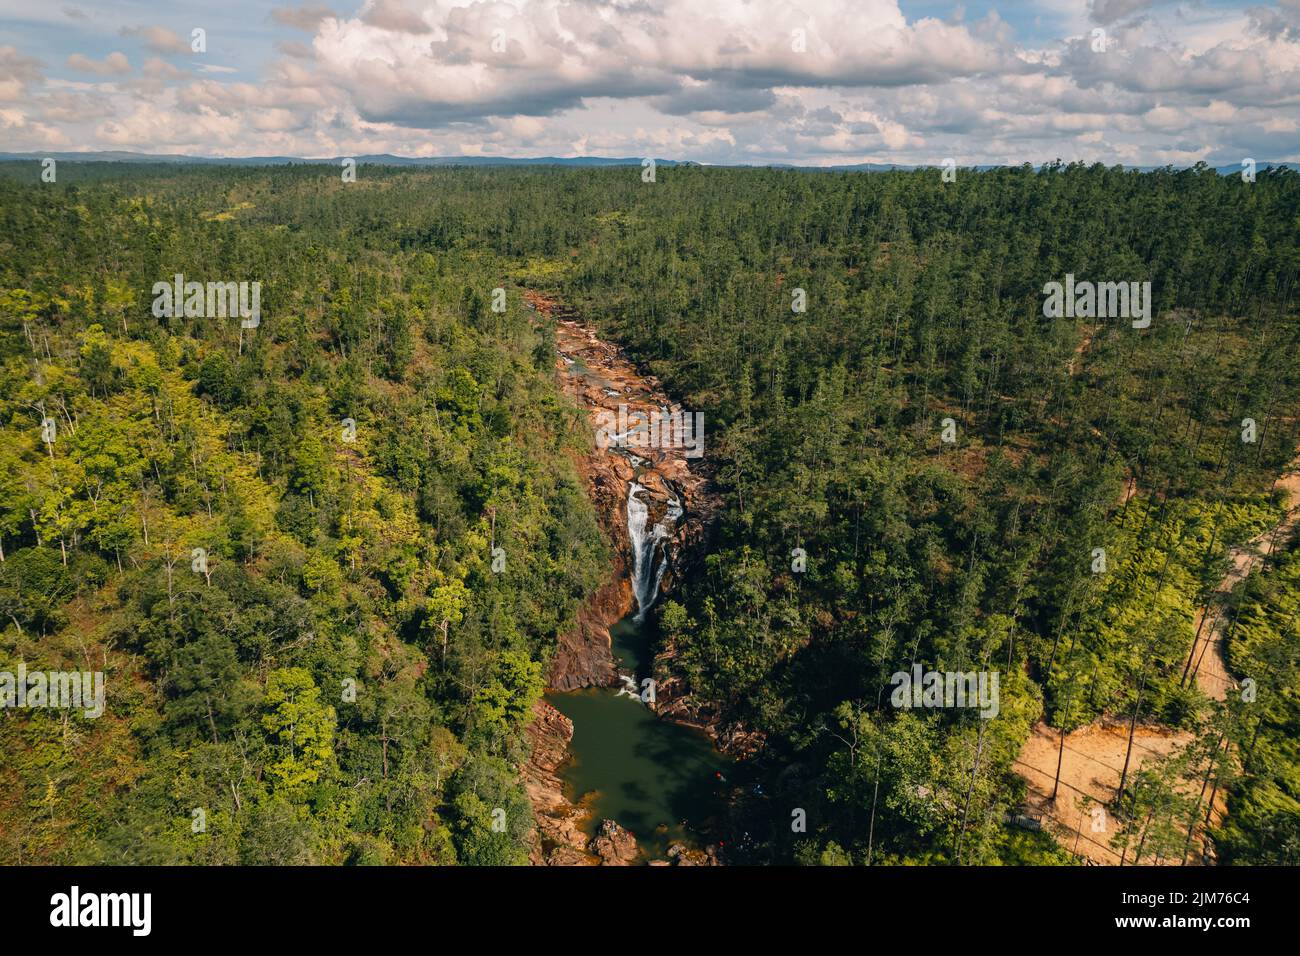 An aerial view of Big Rock Falls in Mountain Pine Ridge, Cayo District, Belize with green forest trees Stock Photo